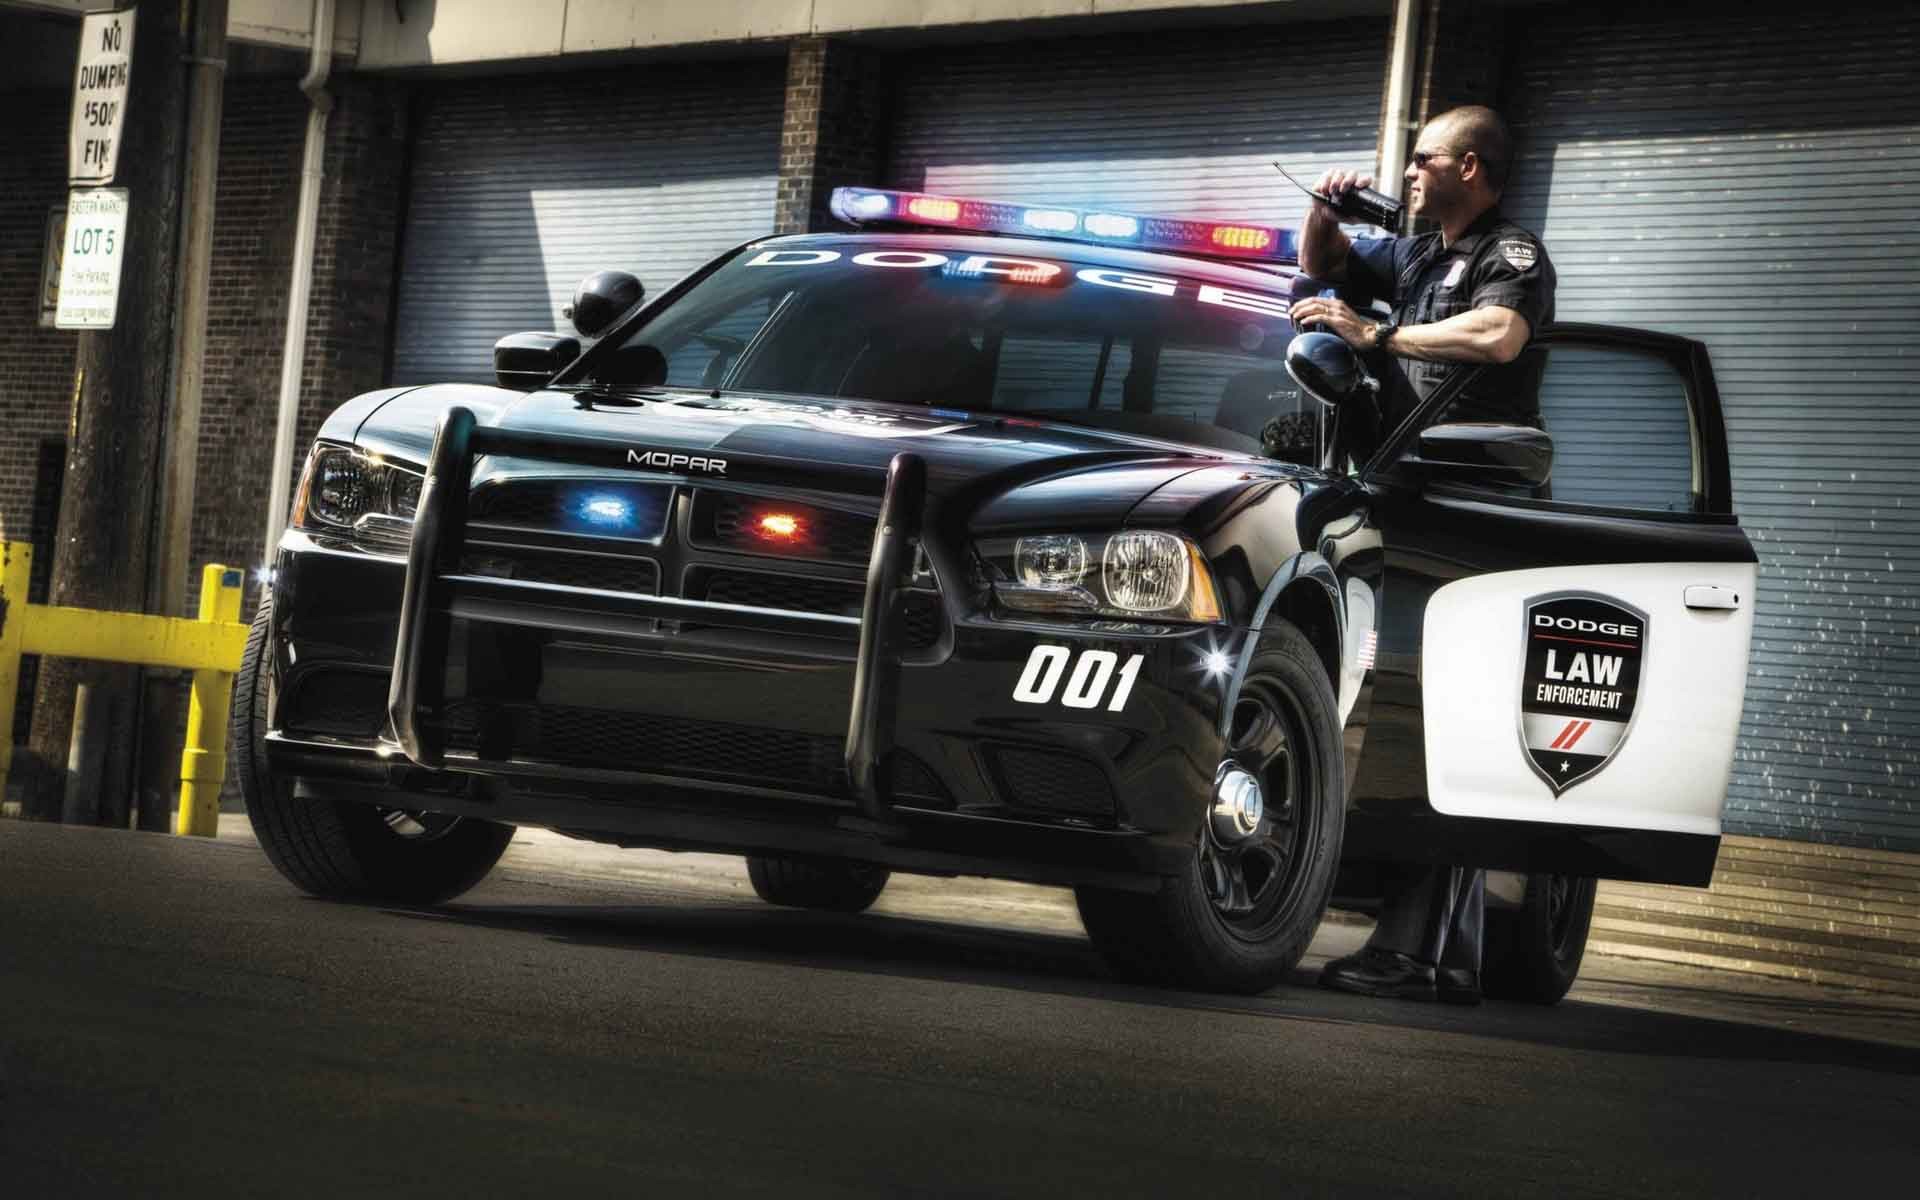 1920x1200 Police Car Wallpapers - Full HD wallpaper search